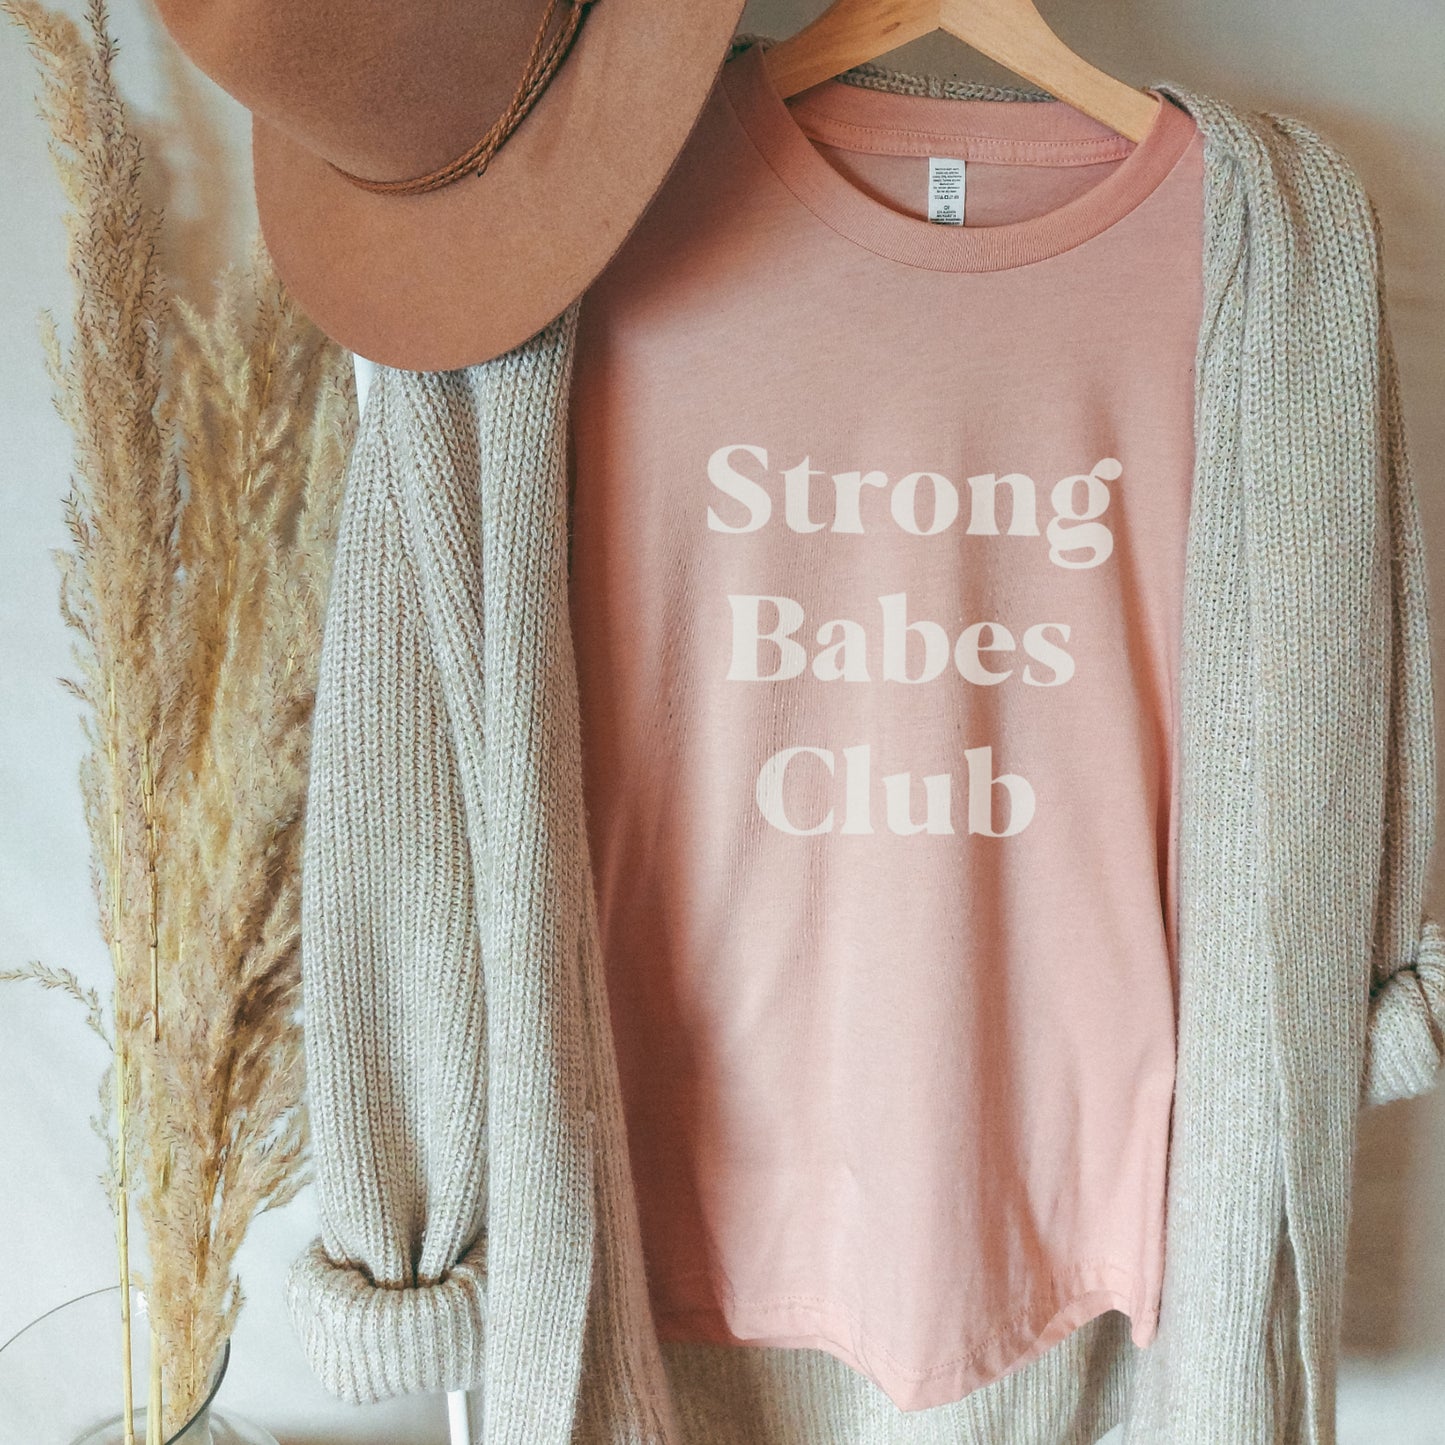 Strong Babes Club tee